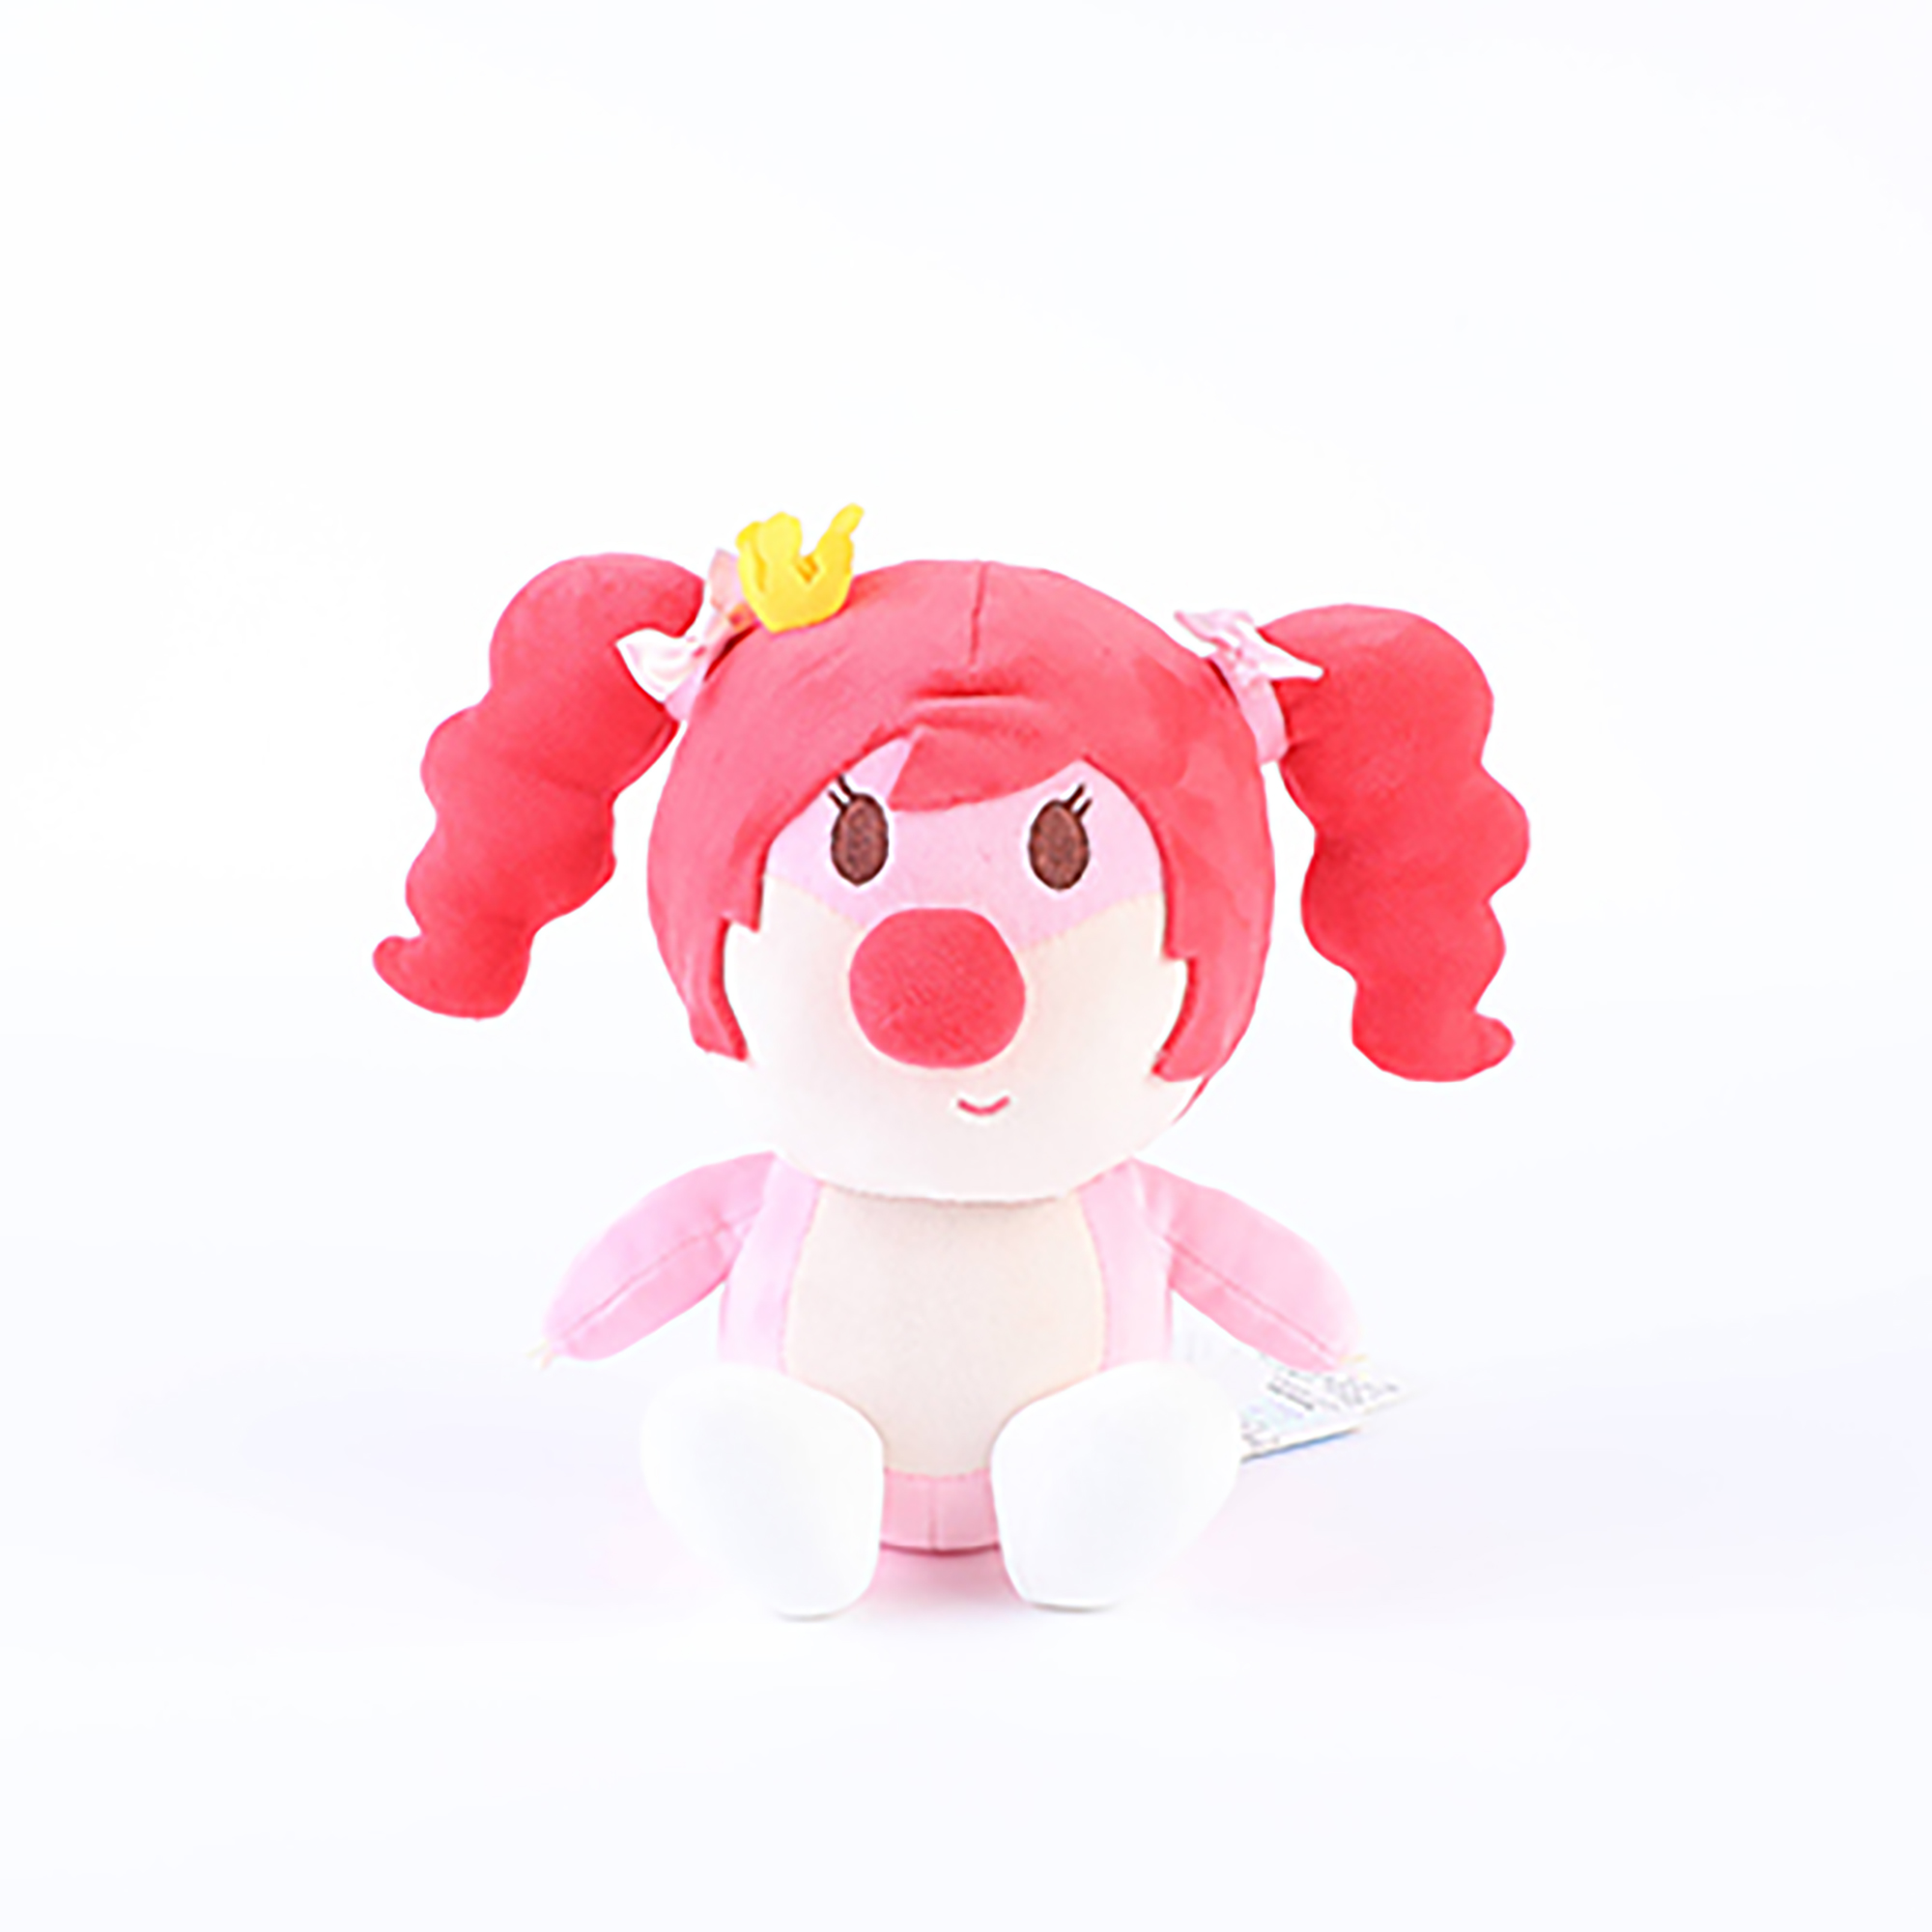 Licensed Stuffed Toy - 8